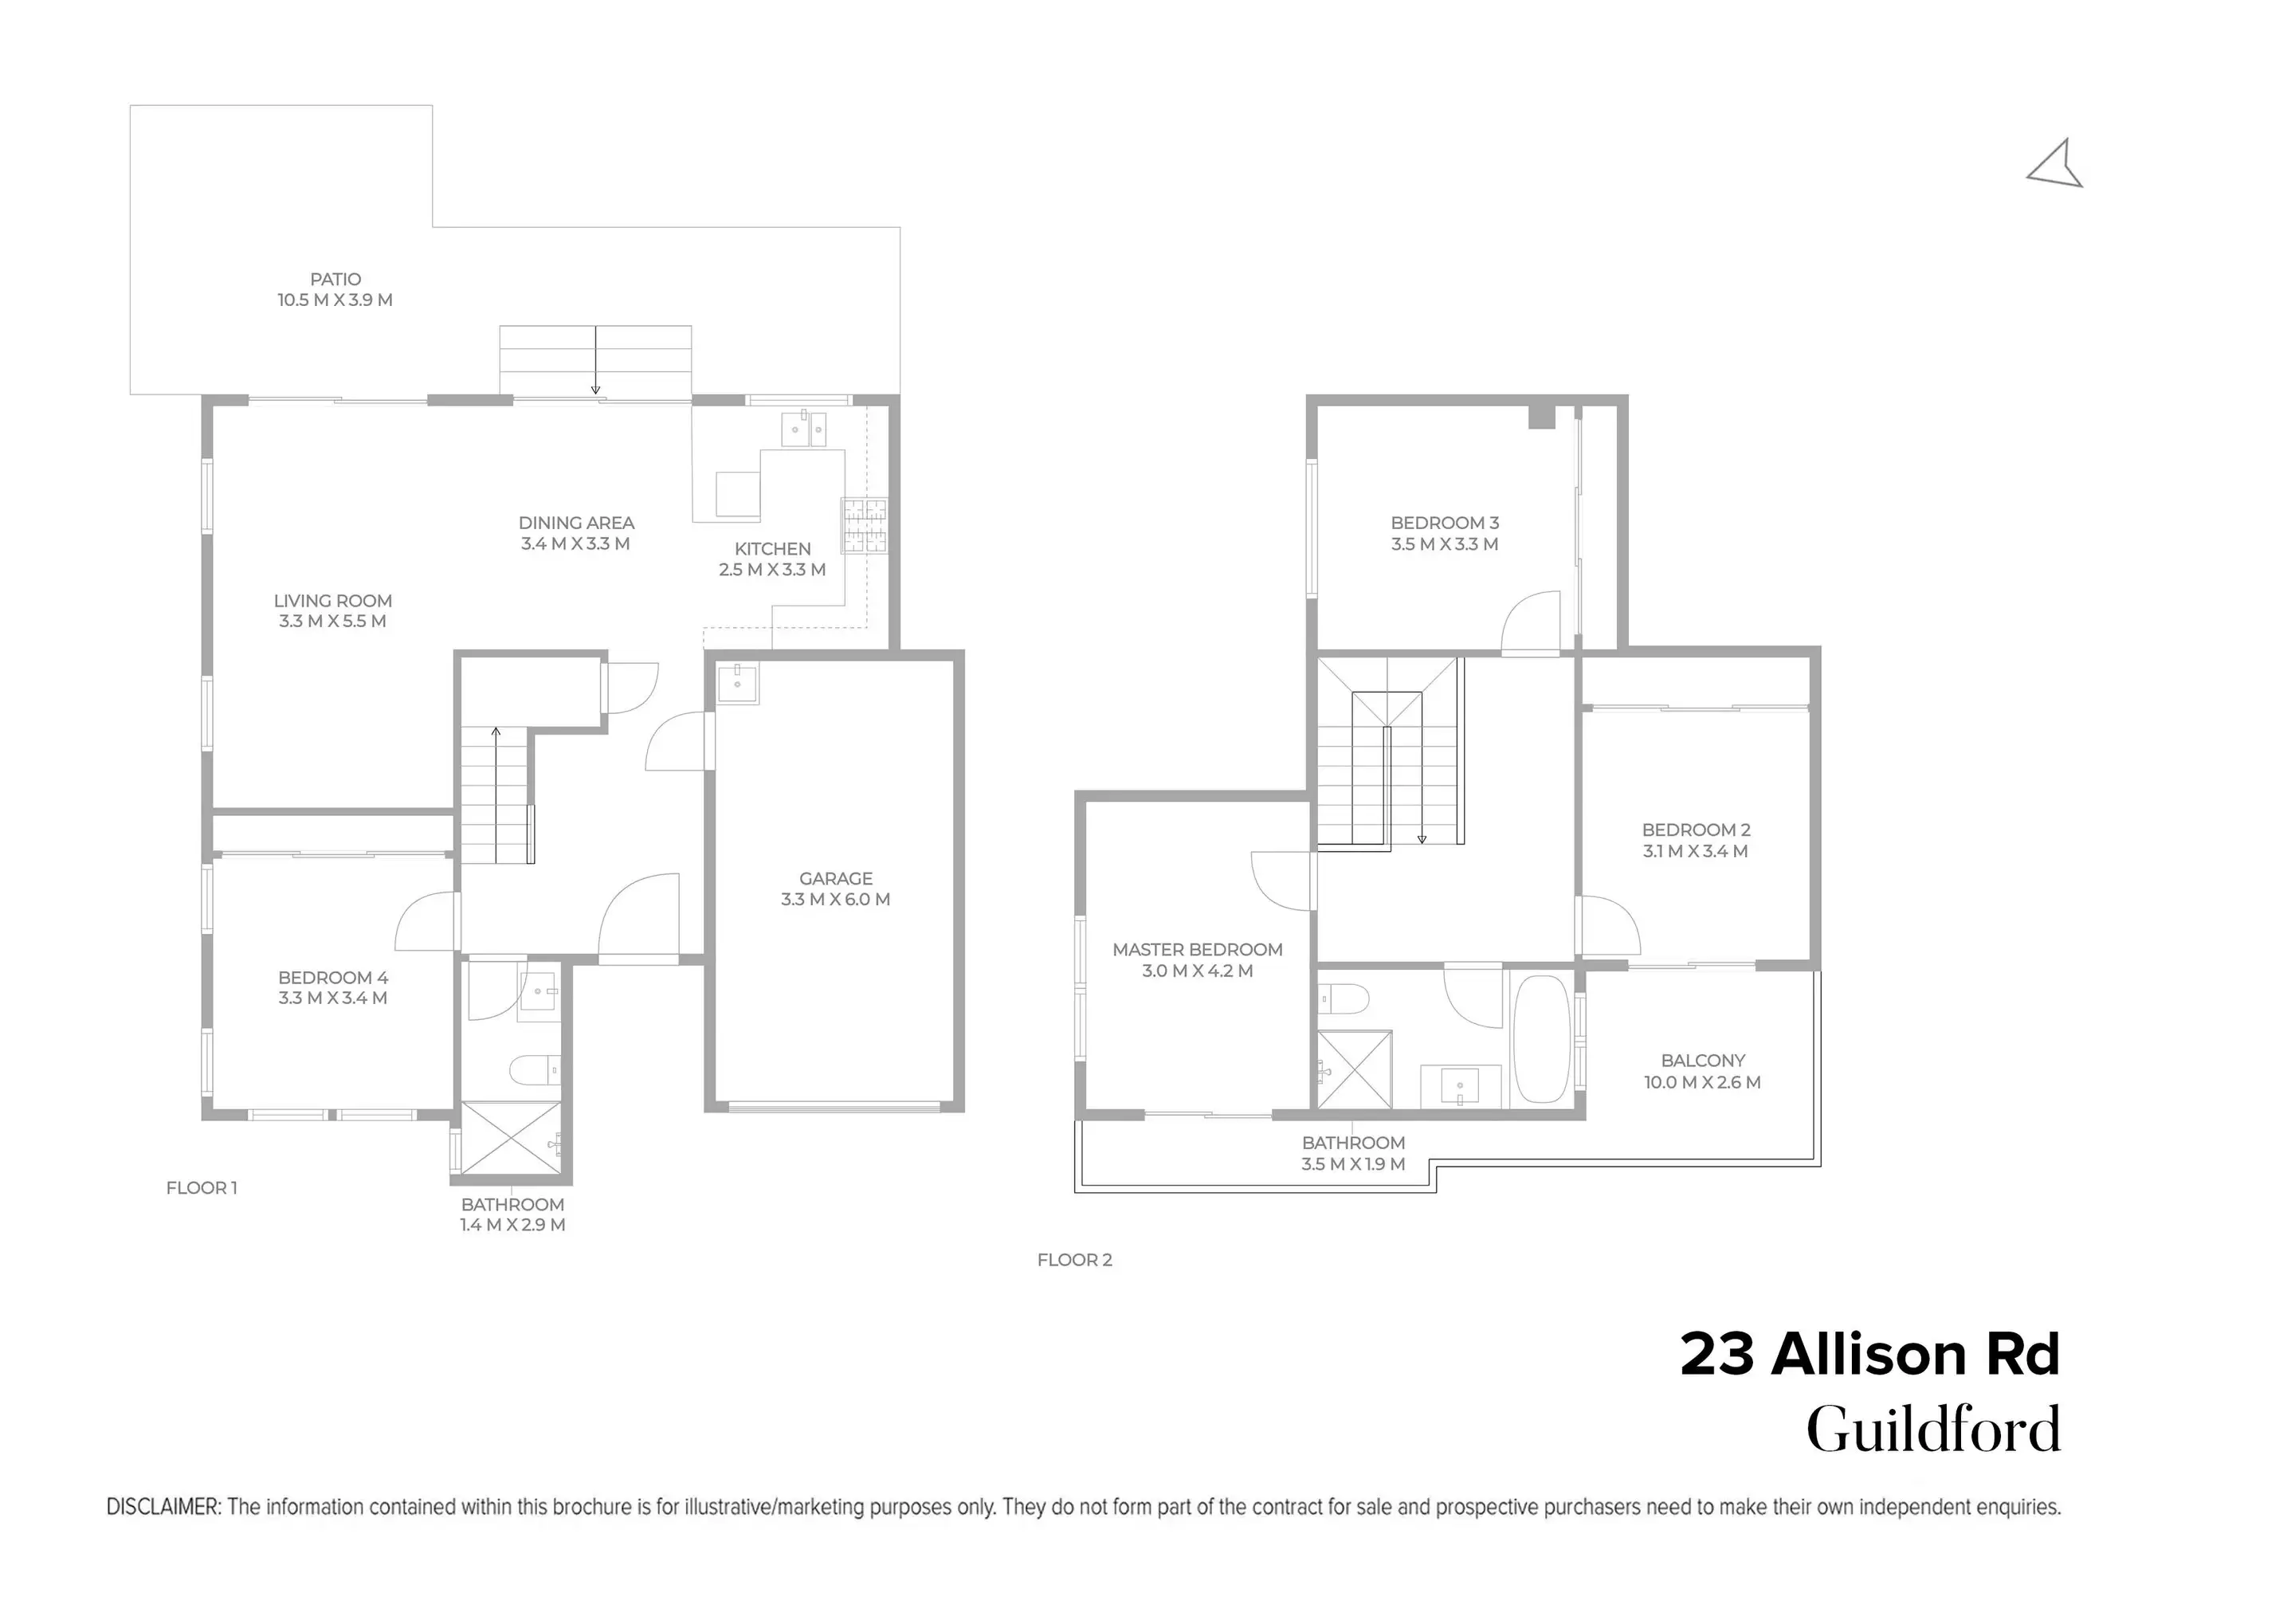 23 Allison Road, Guildford Sold by Chidiac Realty - floorplan